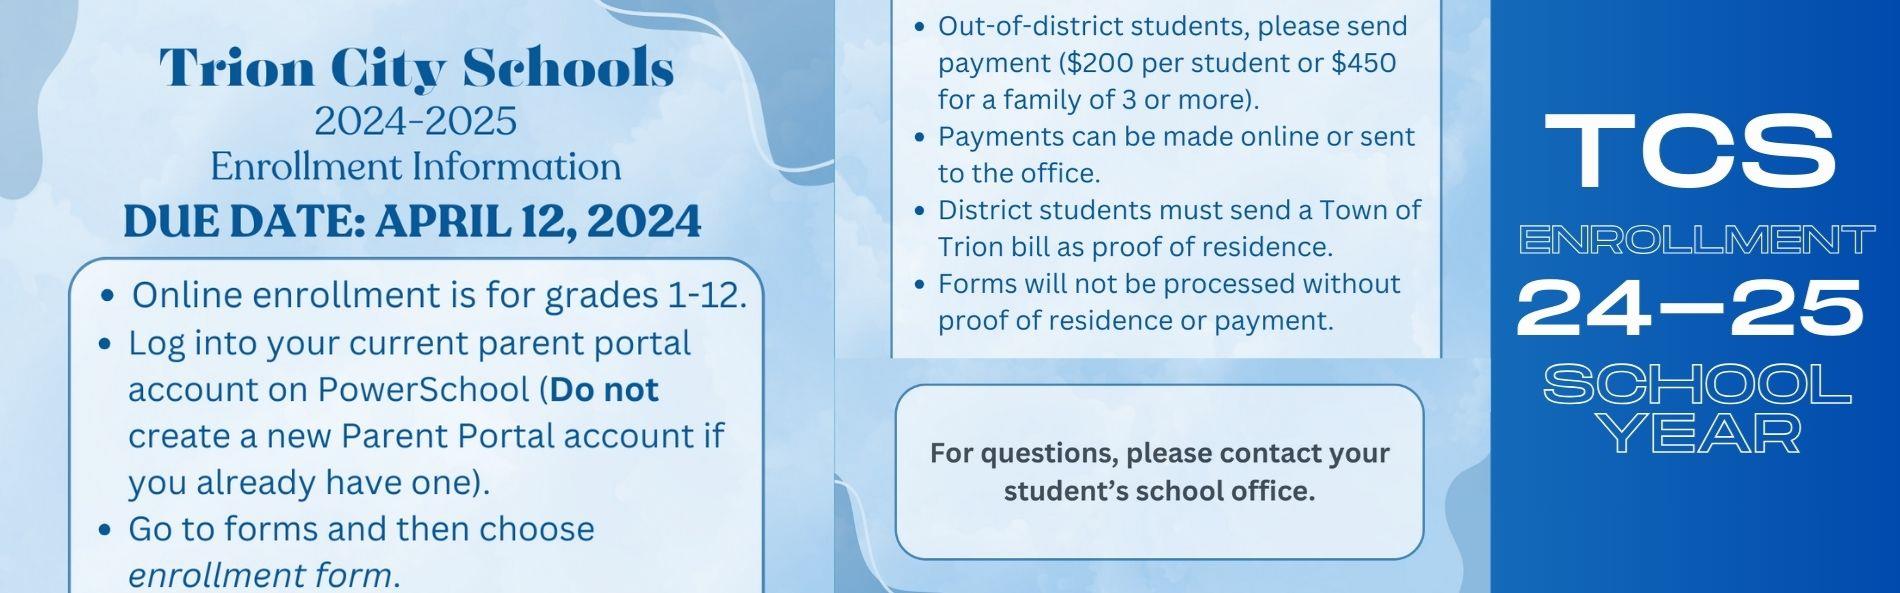 CLICK HERE TO ACCESS ENROLLMENT INFORMATION FOR THE 2024-2025 SCHOOL YEAR